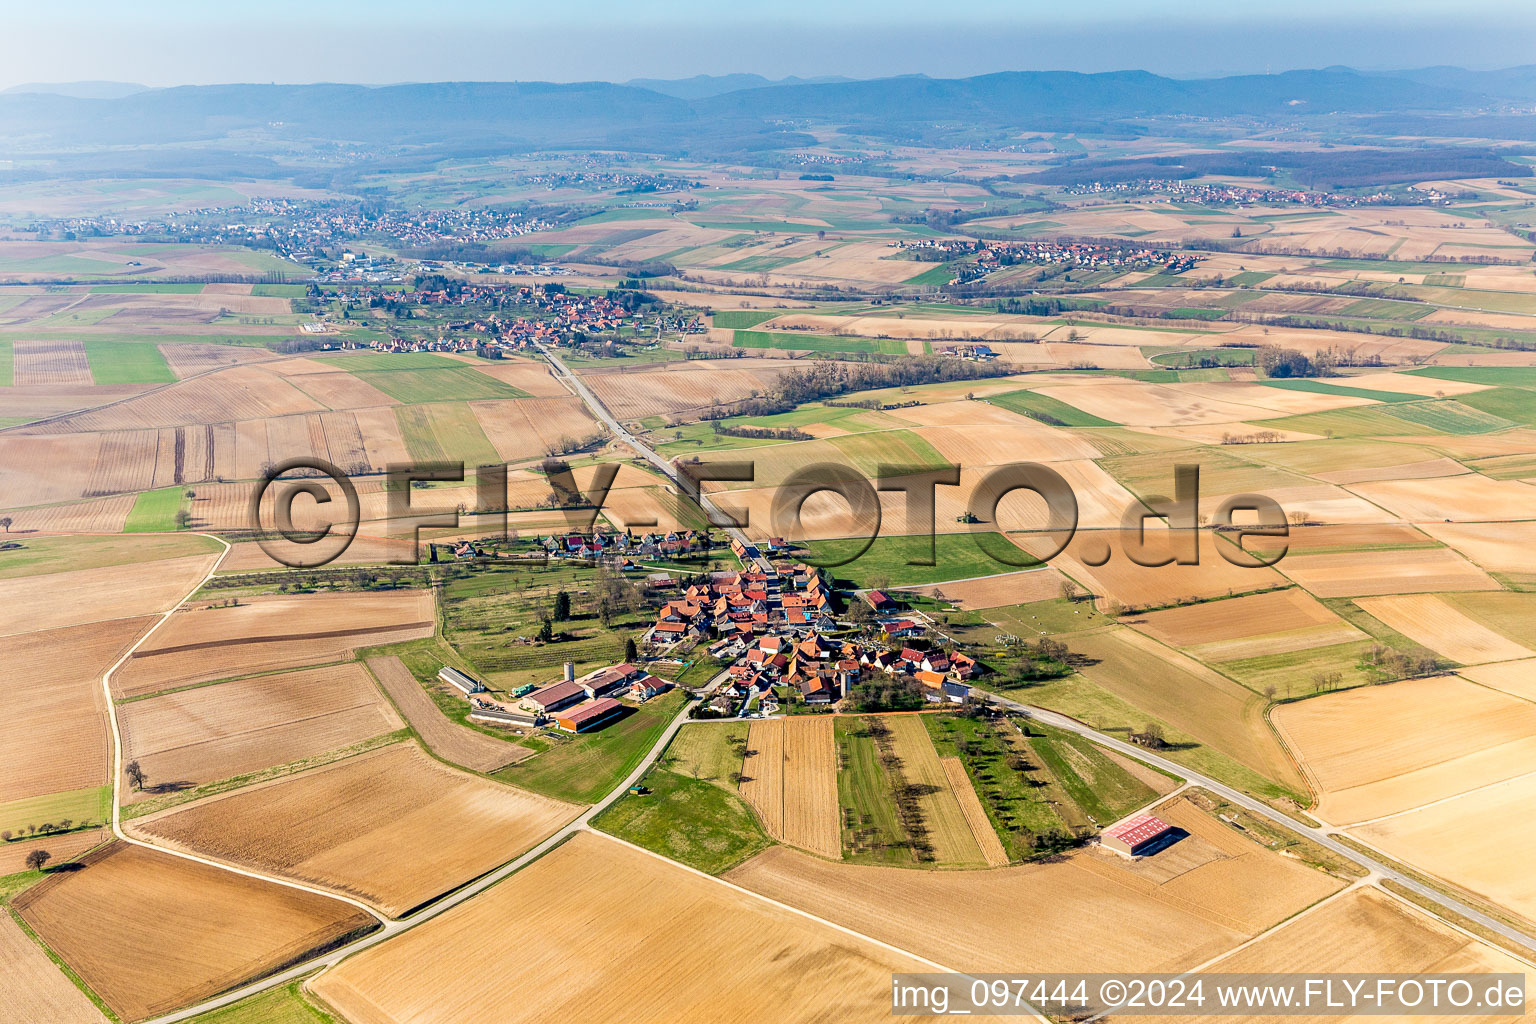 Village - view on the edge of agricultural fields and farmland in the district Kuhlendorf in Betschdorf in Grand Est, France